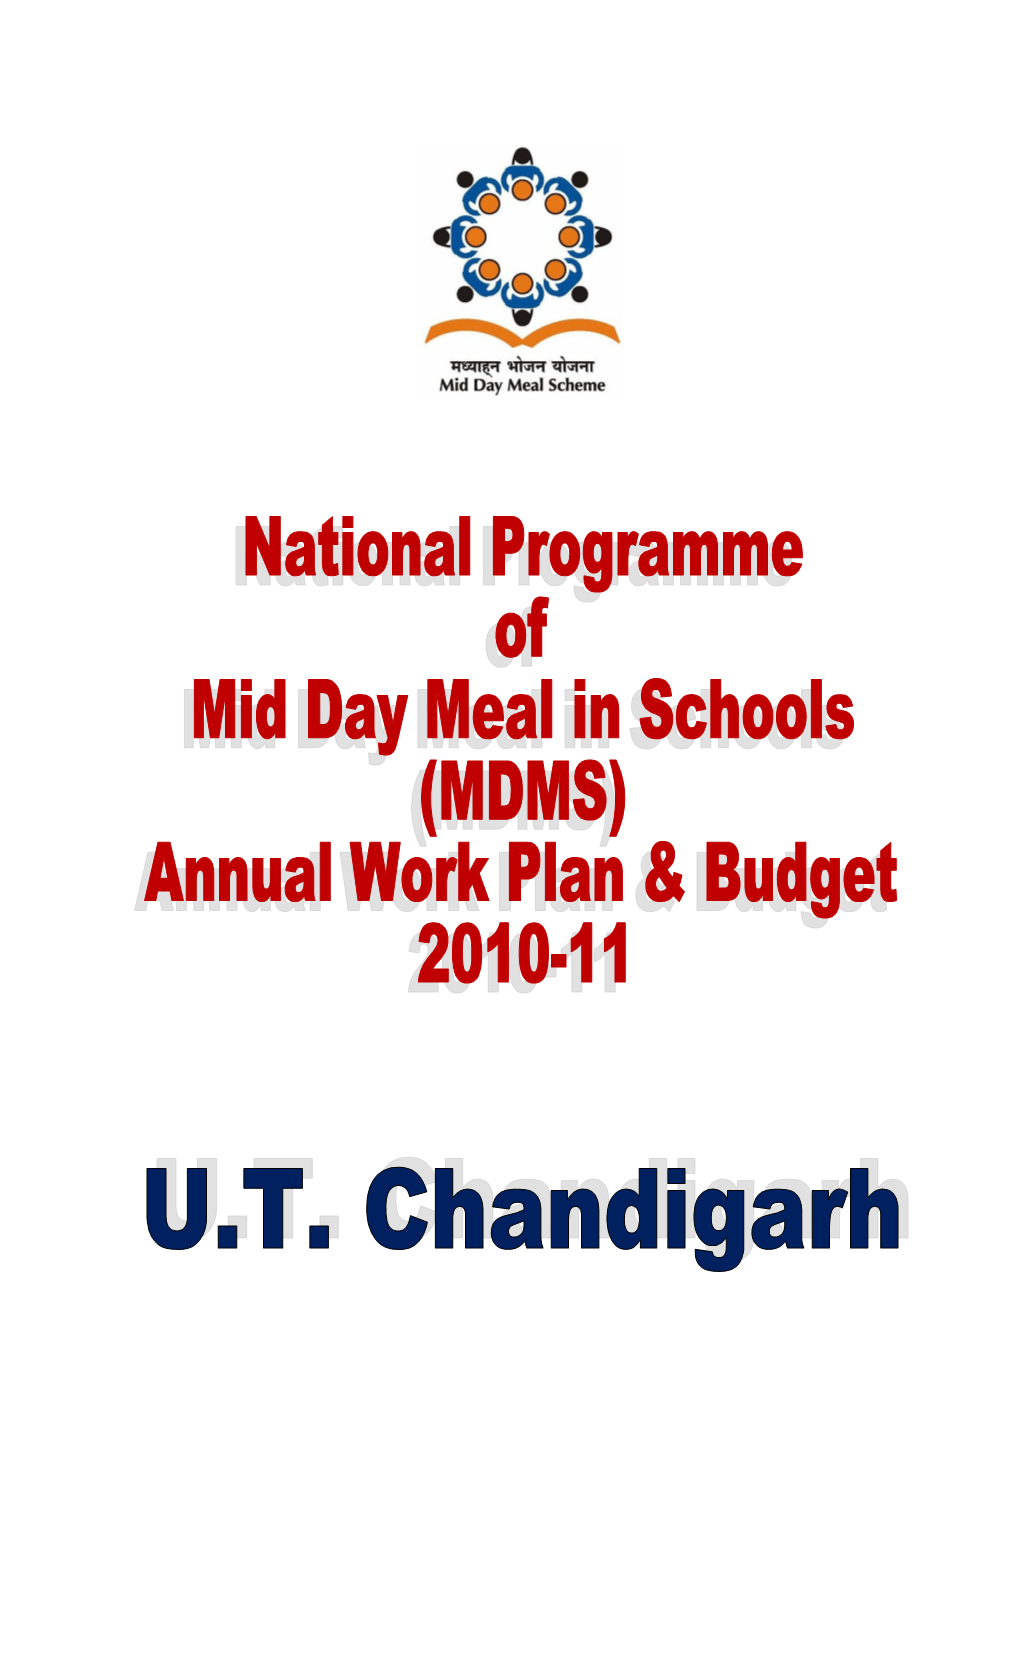 Mid Day Meal Programme